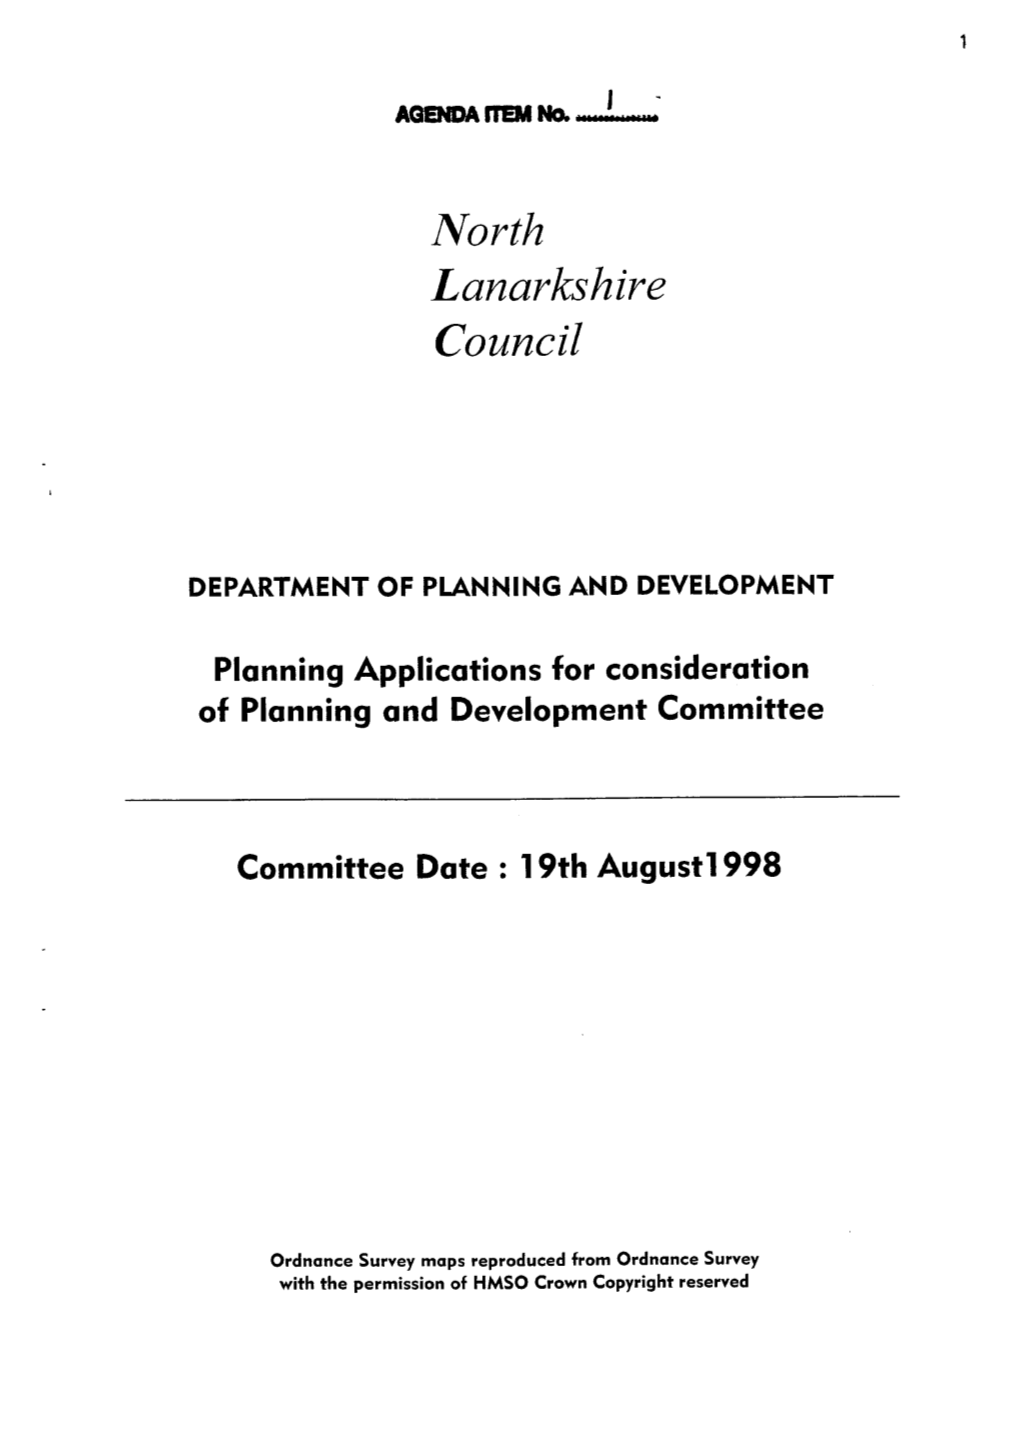 Planning Applications for Consideration of Planning and Development Committee